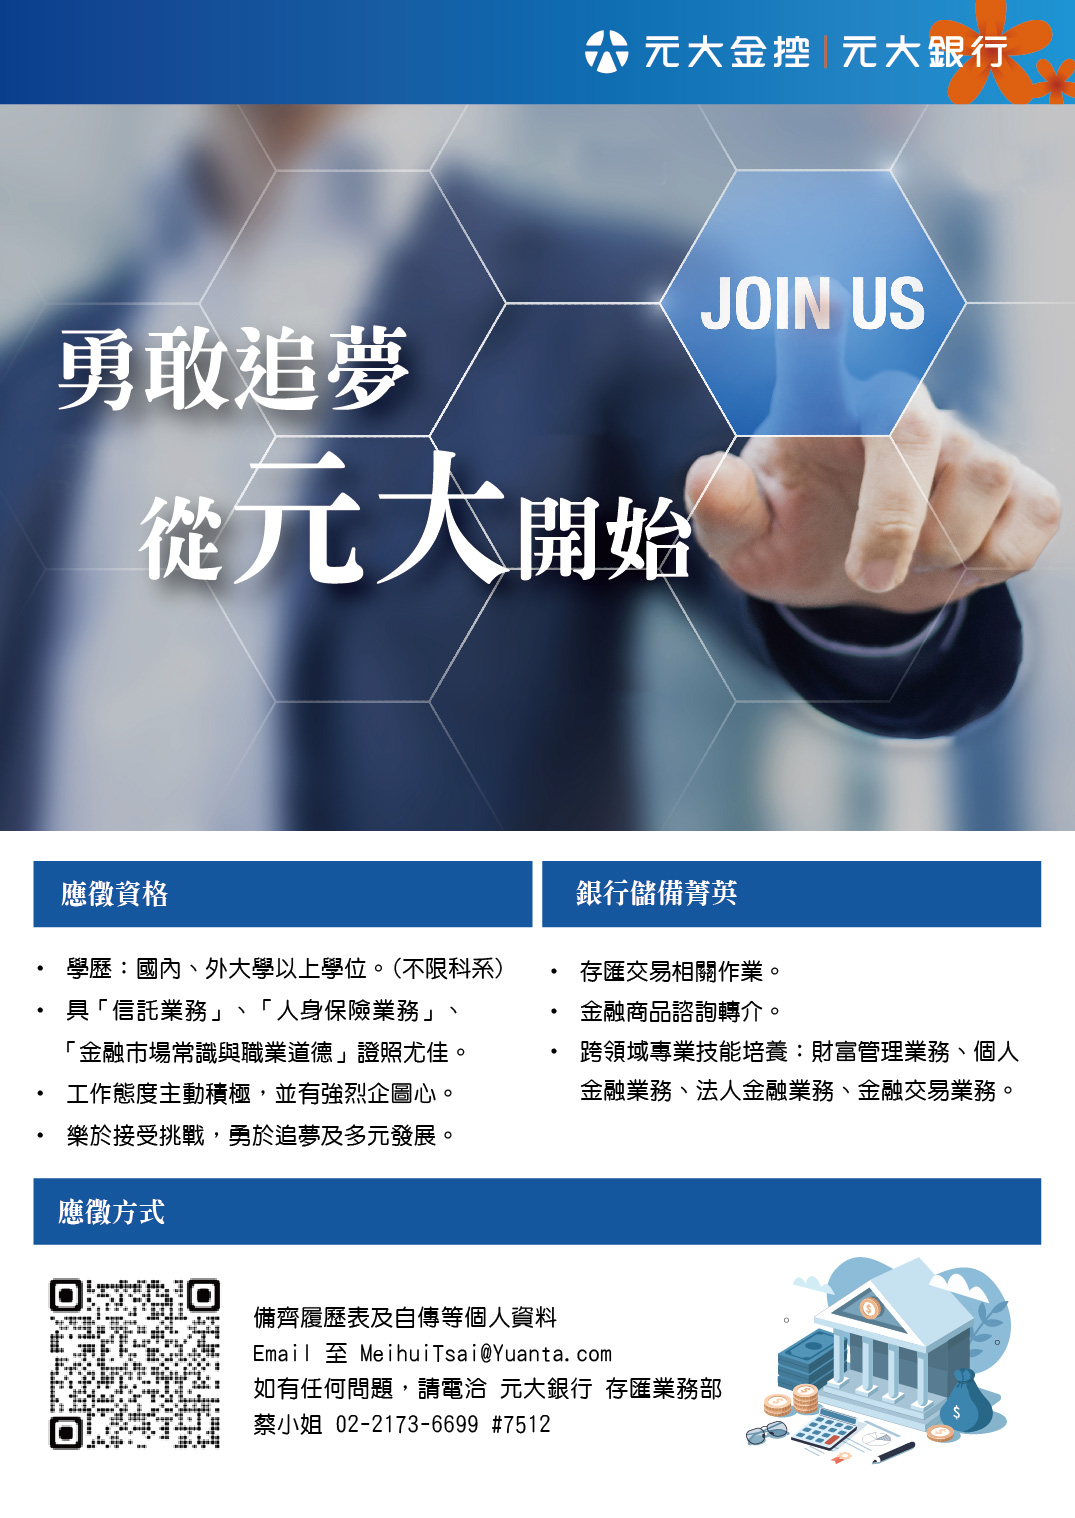 Featured image for “Yuanta Commercial Bank Recruiting”